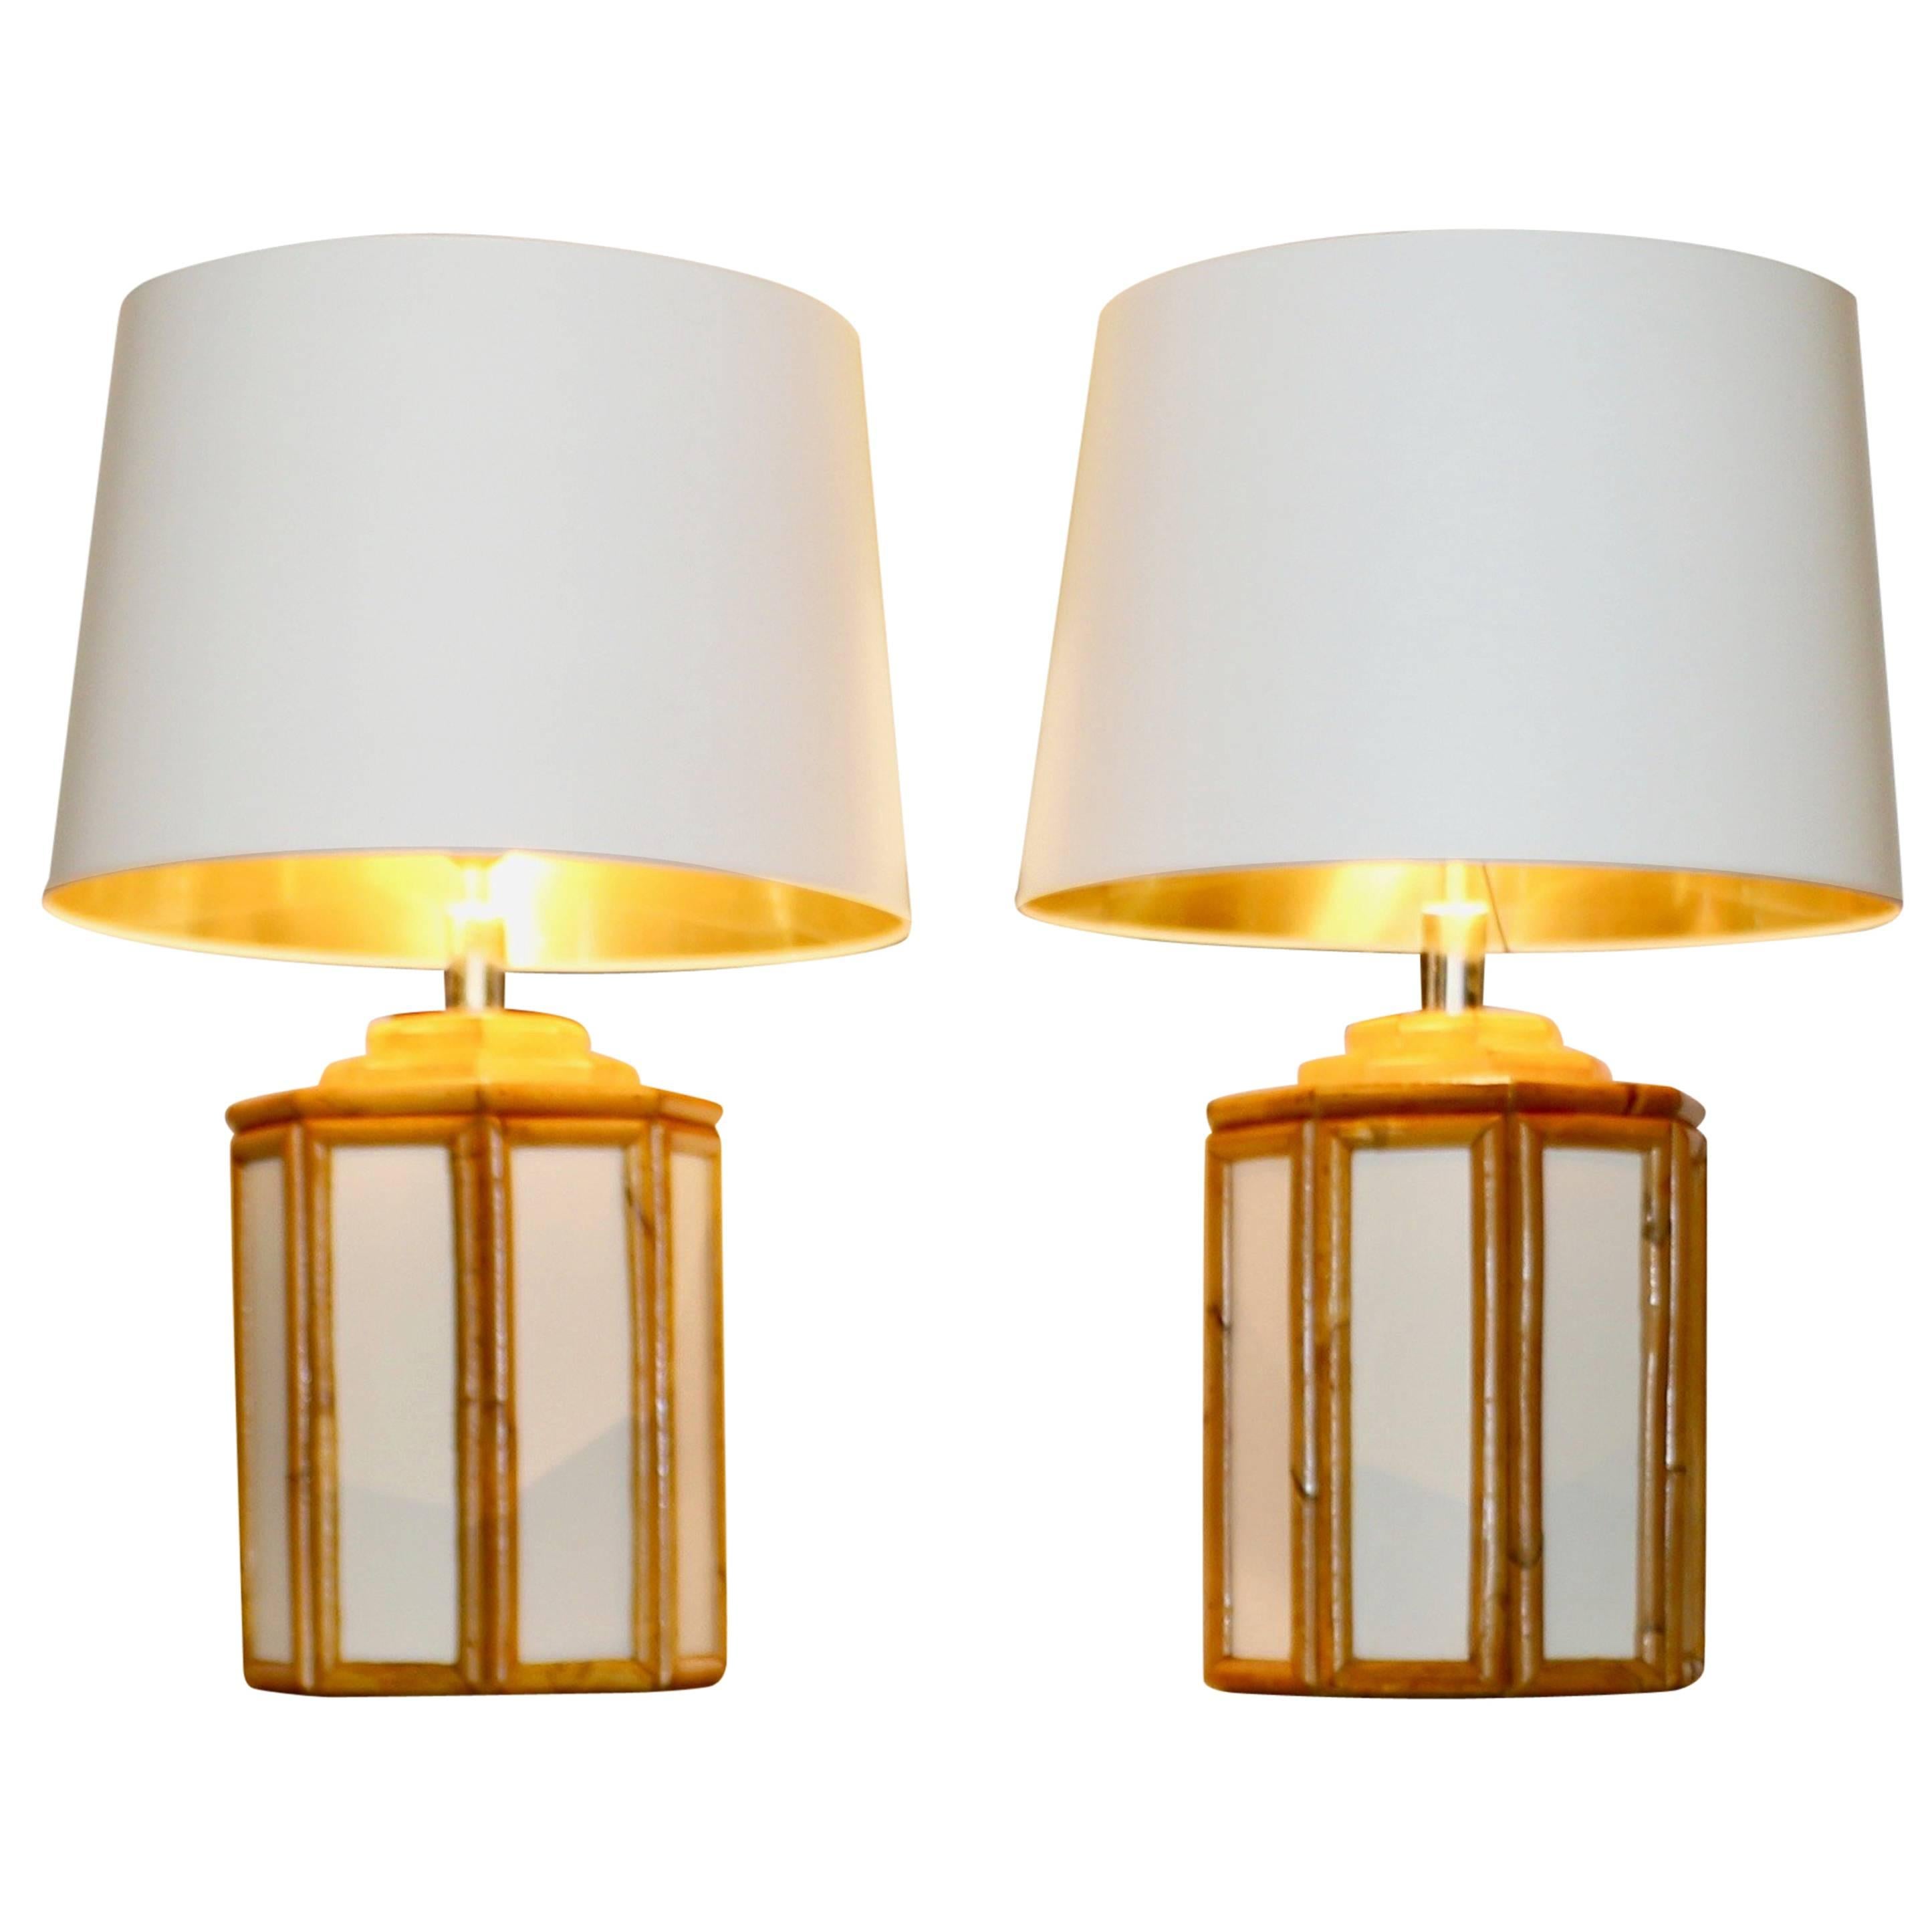 Pair of Table Lamps with a Bamboo Decor, circa 1980